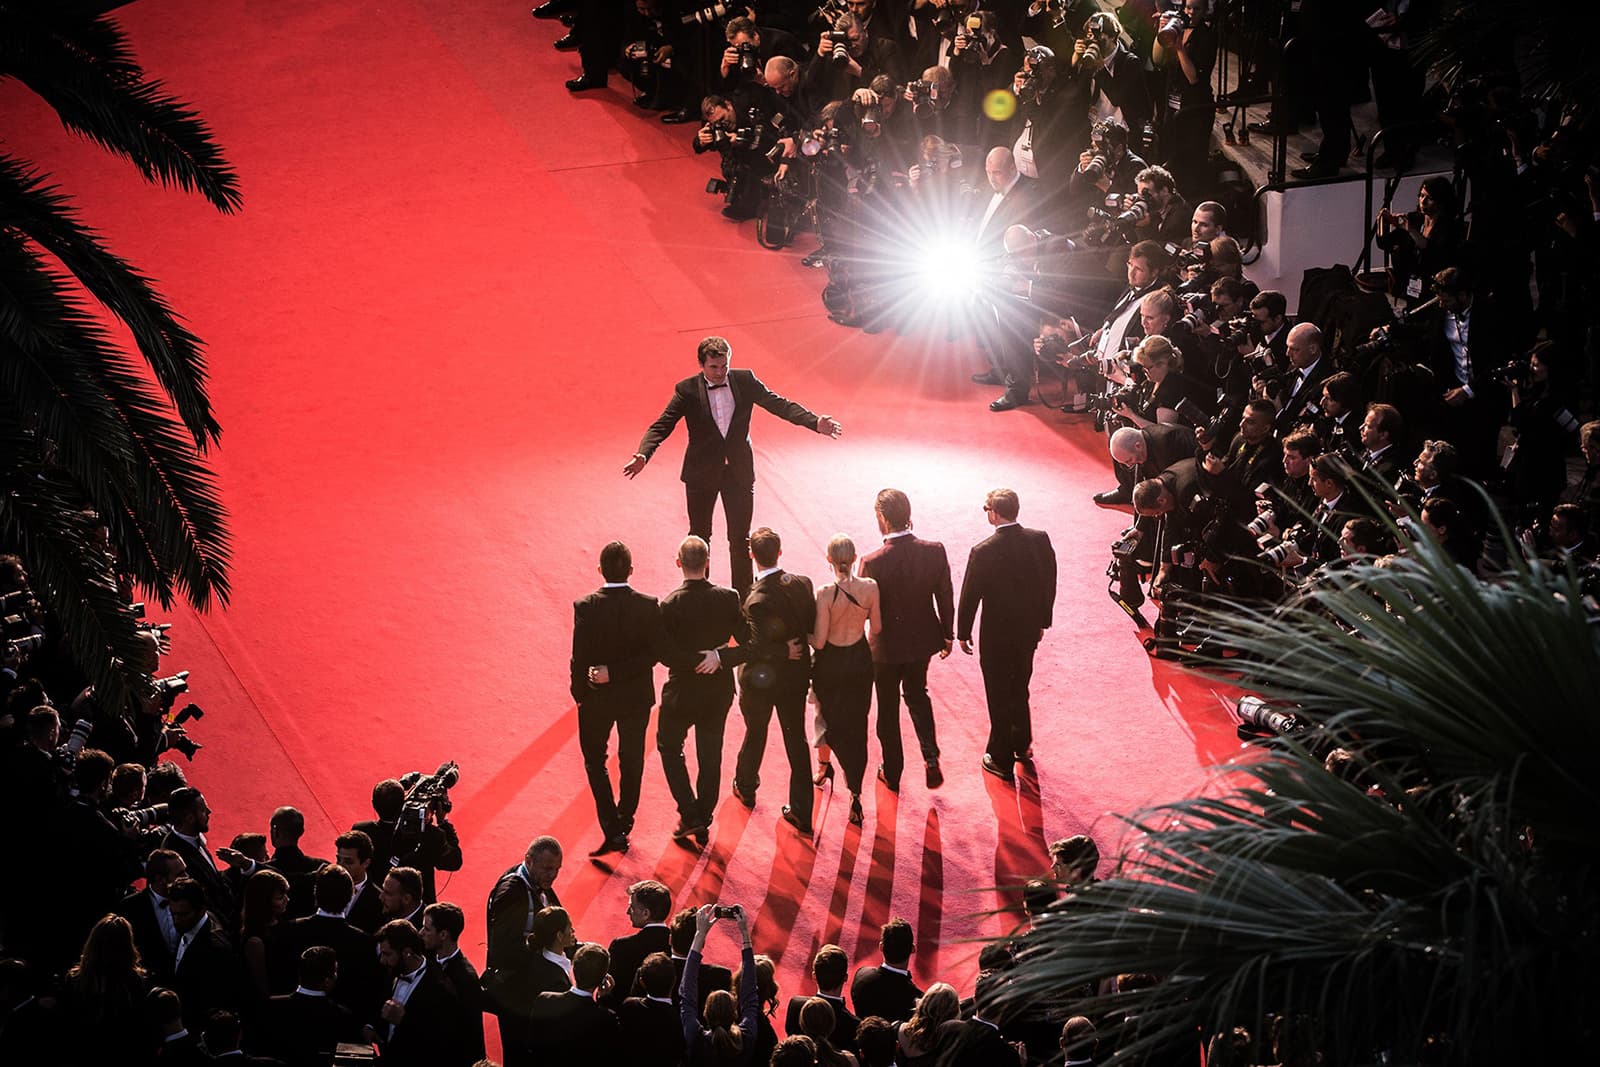 The Cannes red carpet